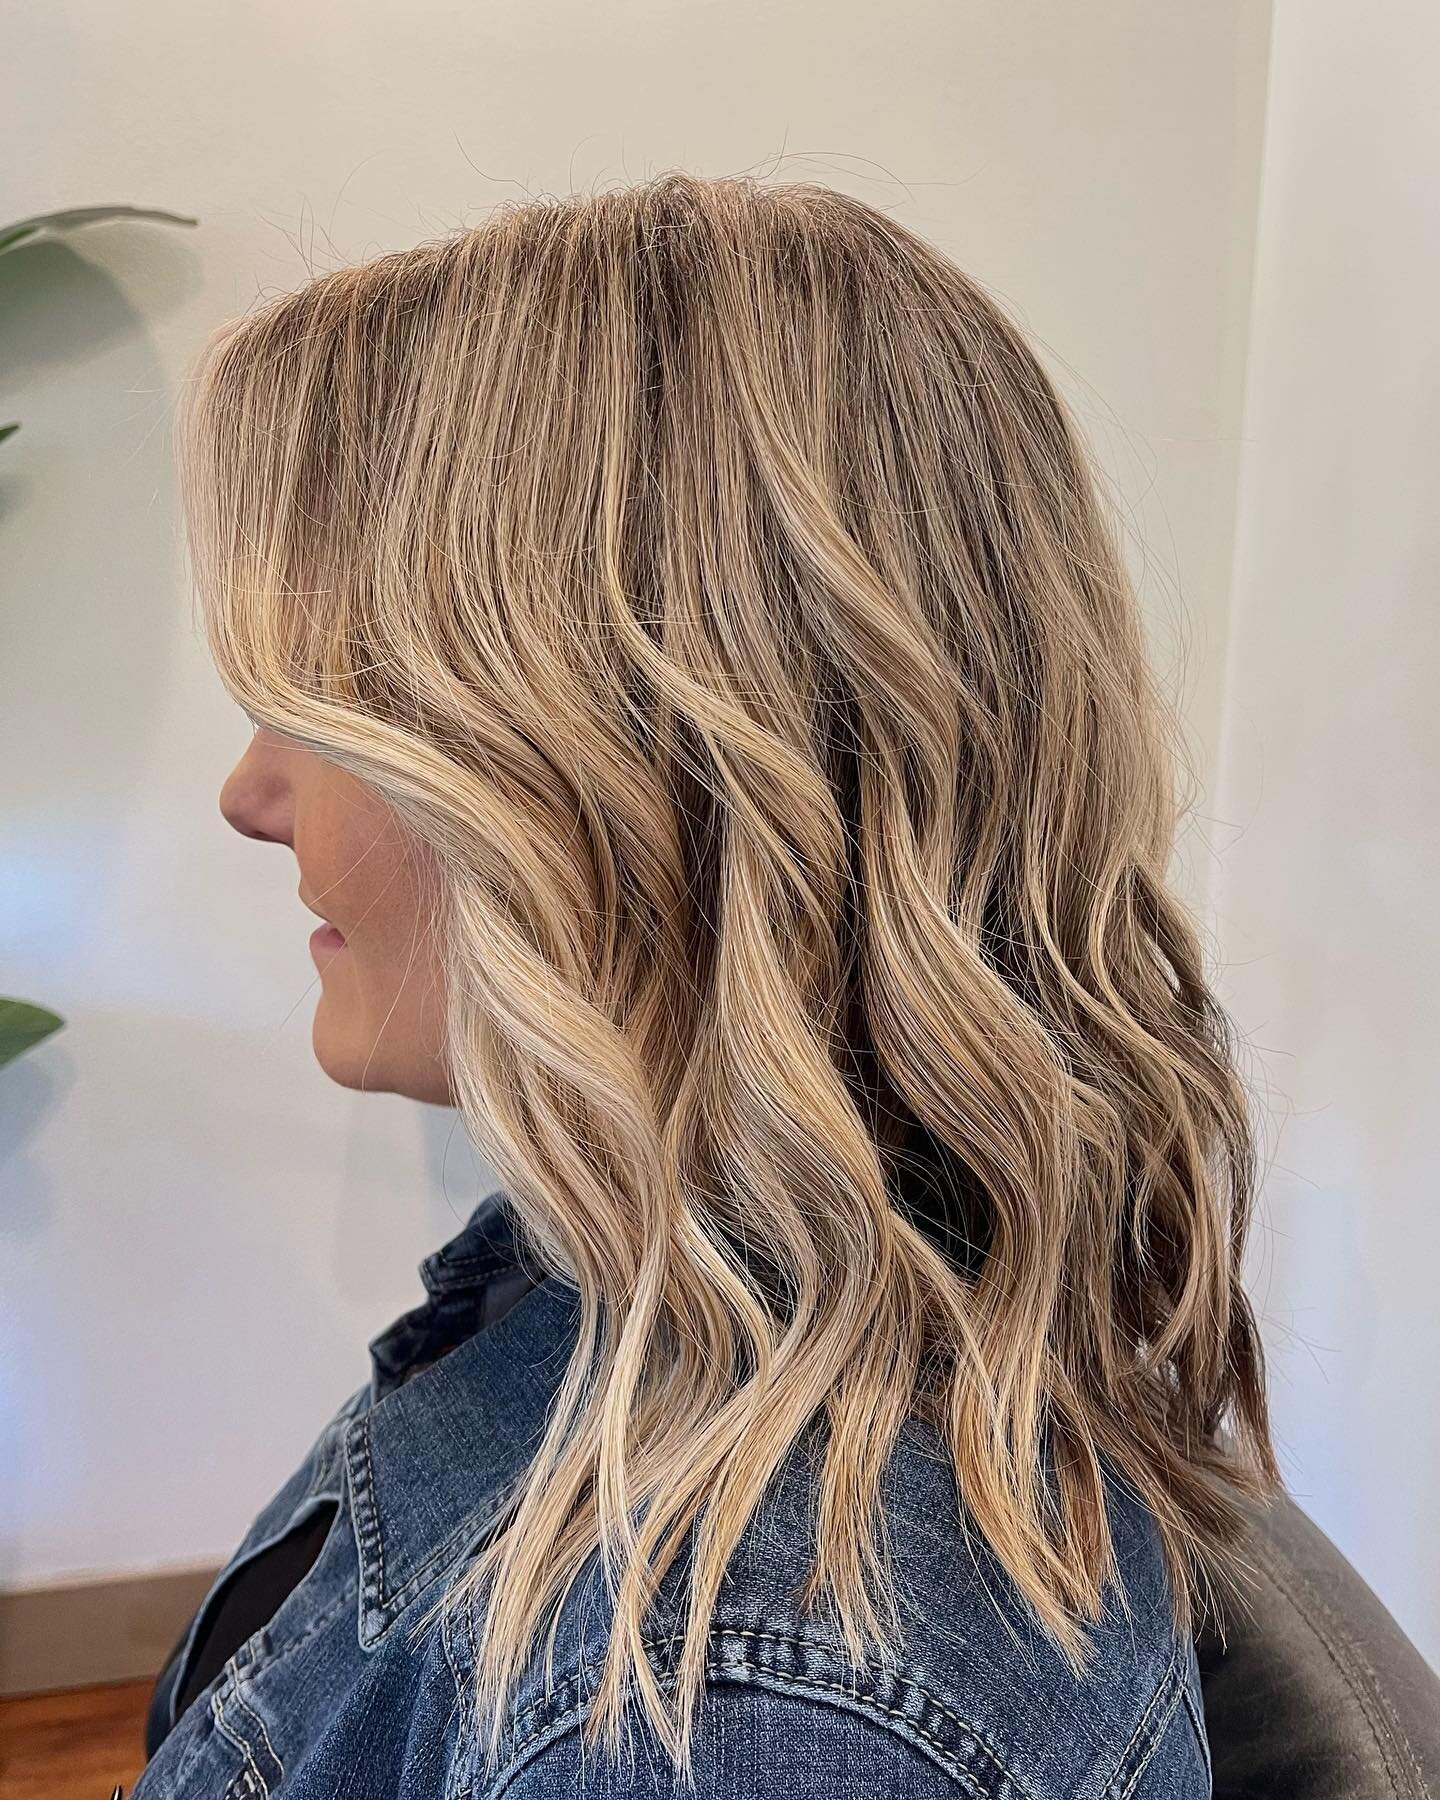 service pictured// level 2 blonding &amp; cut
artist// @lamunyeka 

Ready to book your next service? Call the salon or click the link in our bio to schedule 24/7. 

#issaquahwa #issaquahstylist #issaquahhairsalon #maplevalleywa #maplevalleyhairstylis